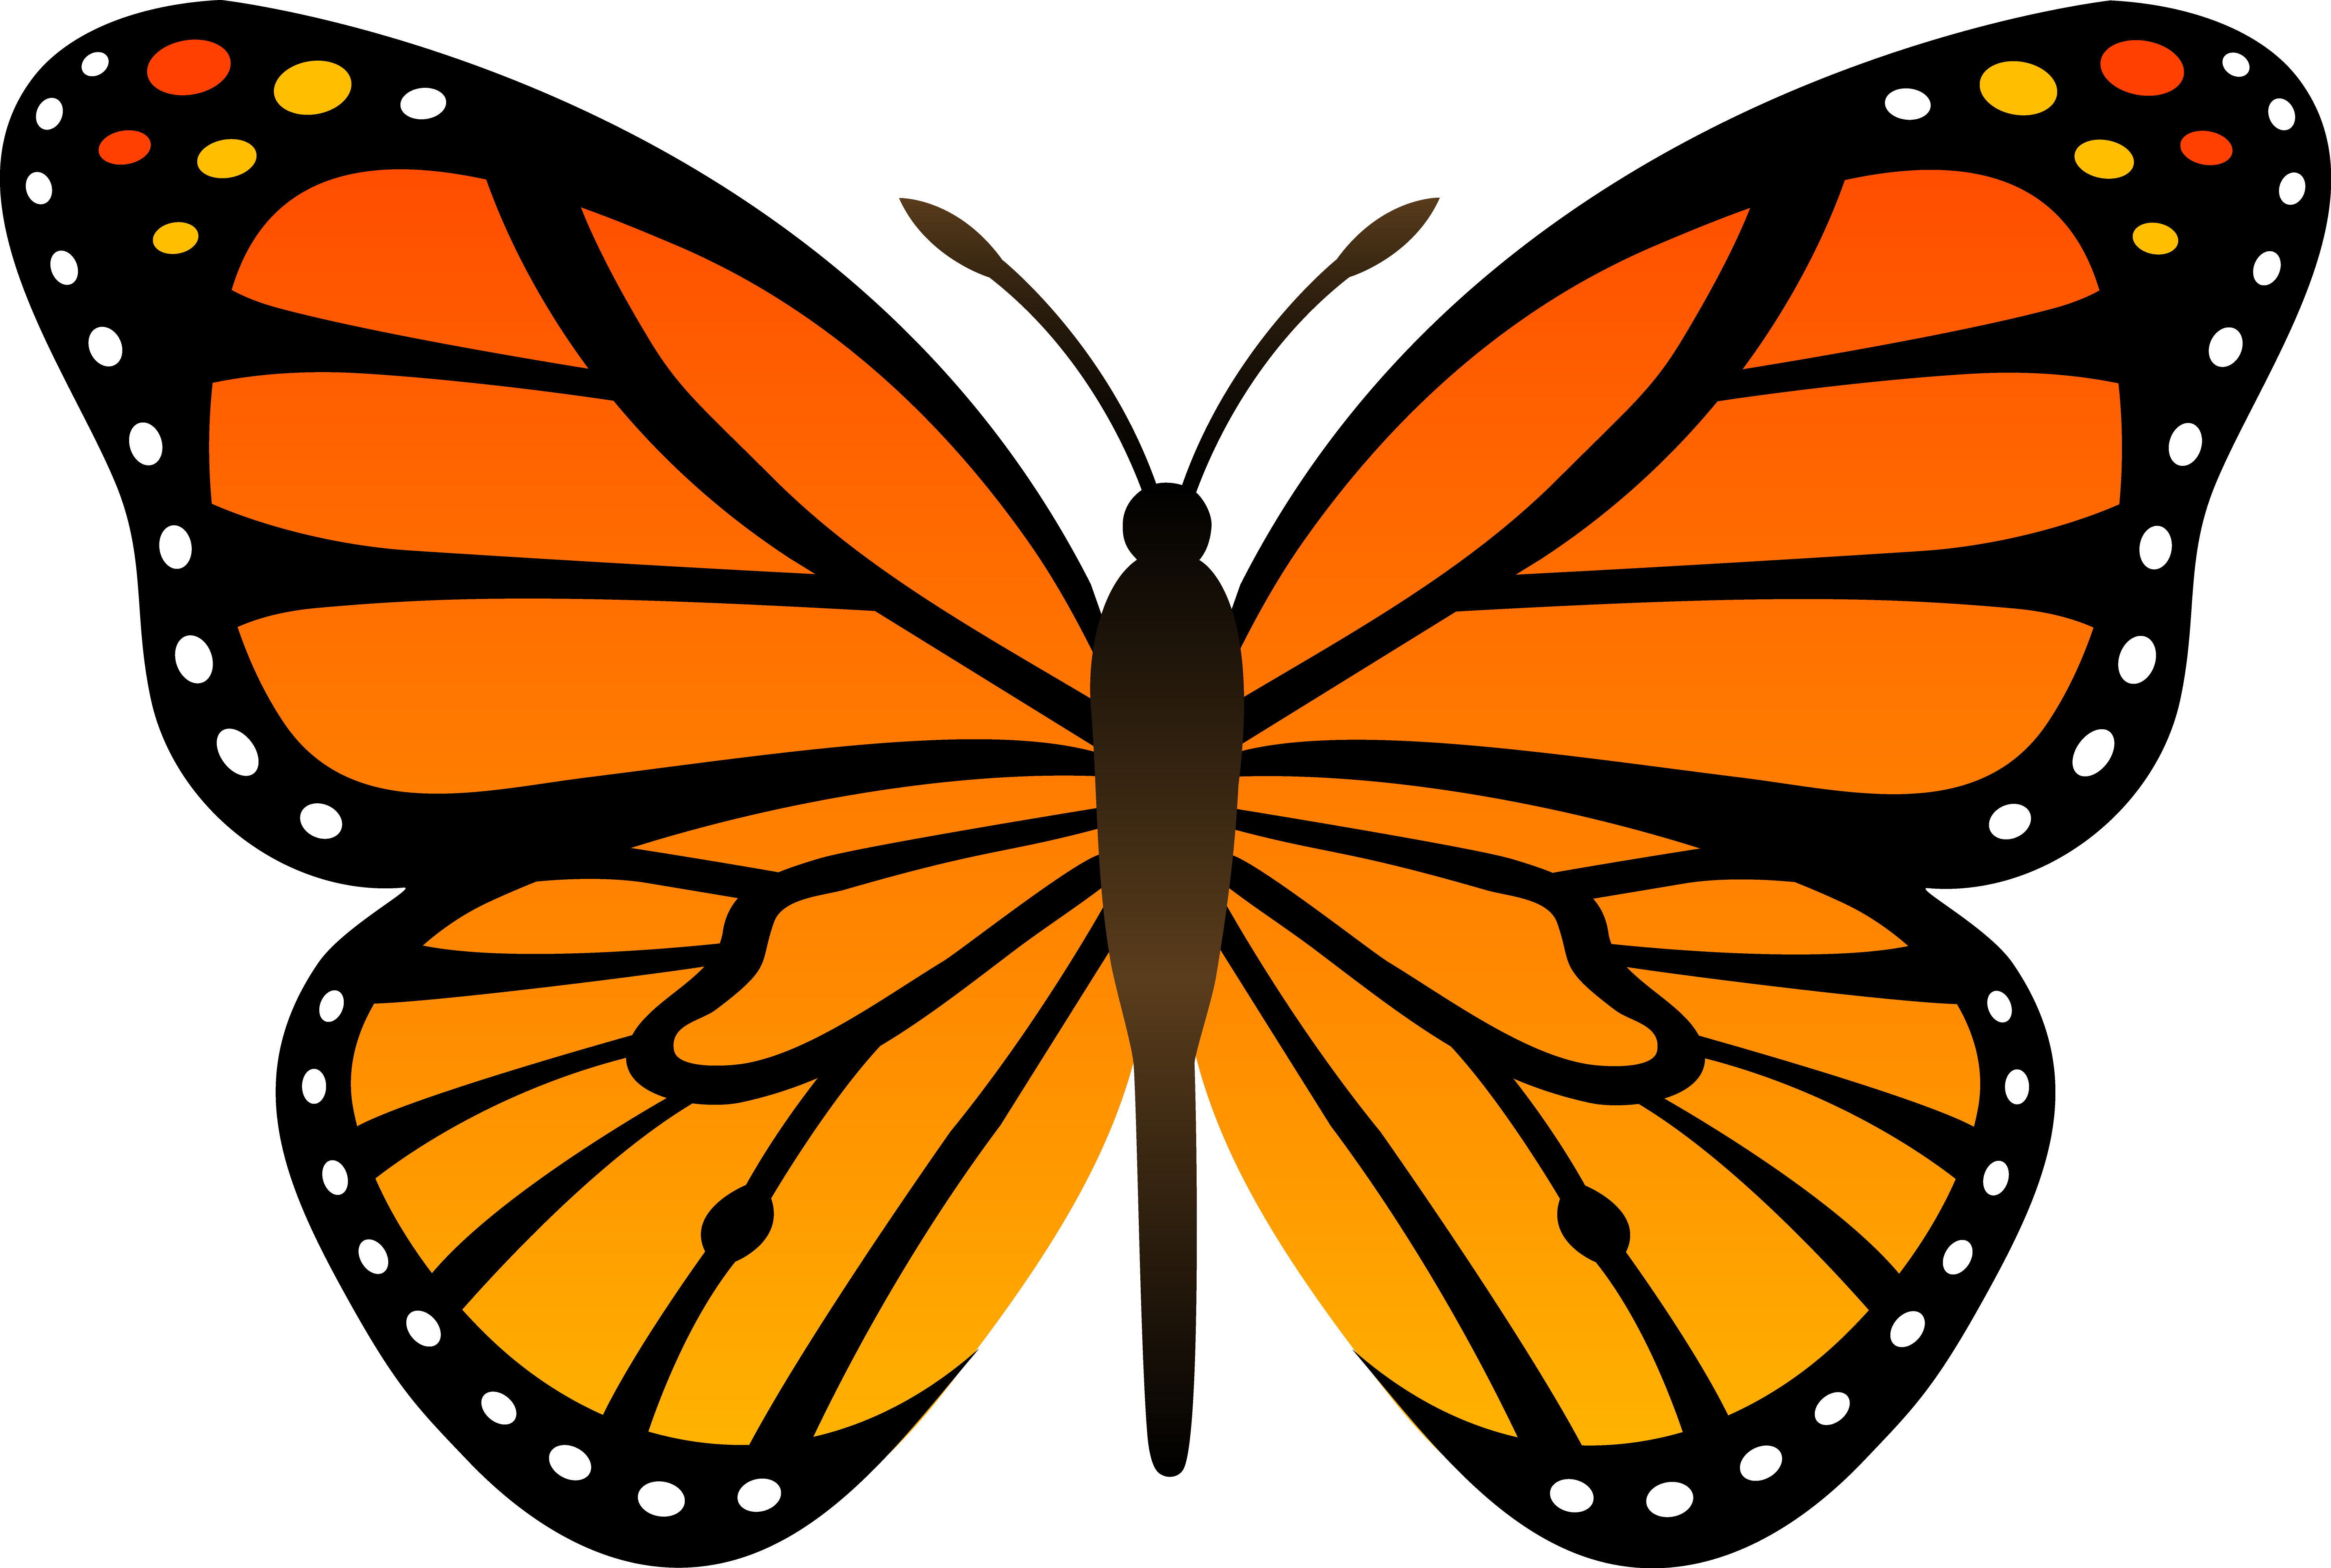 Monarch butterfly clipart ima